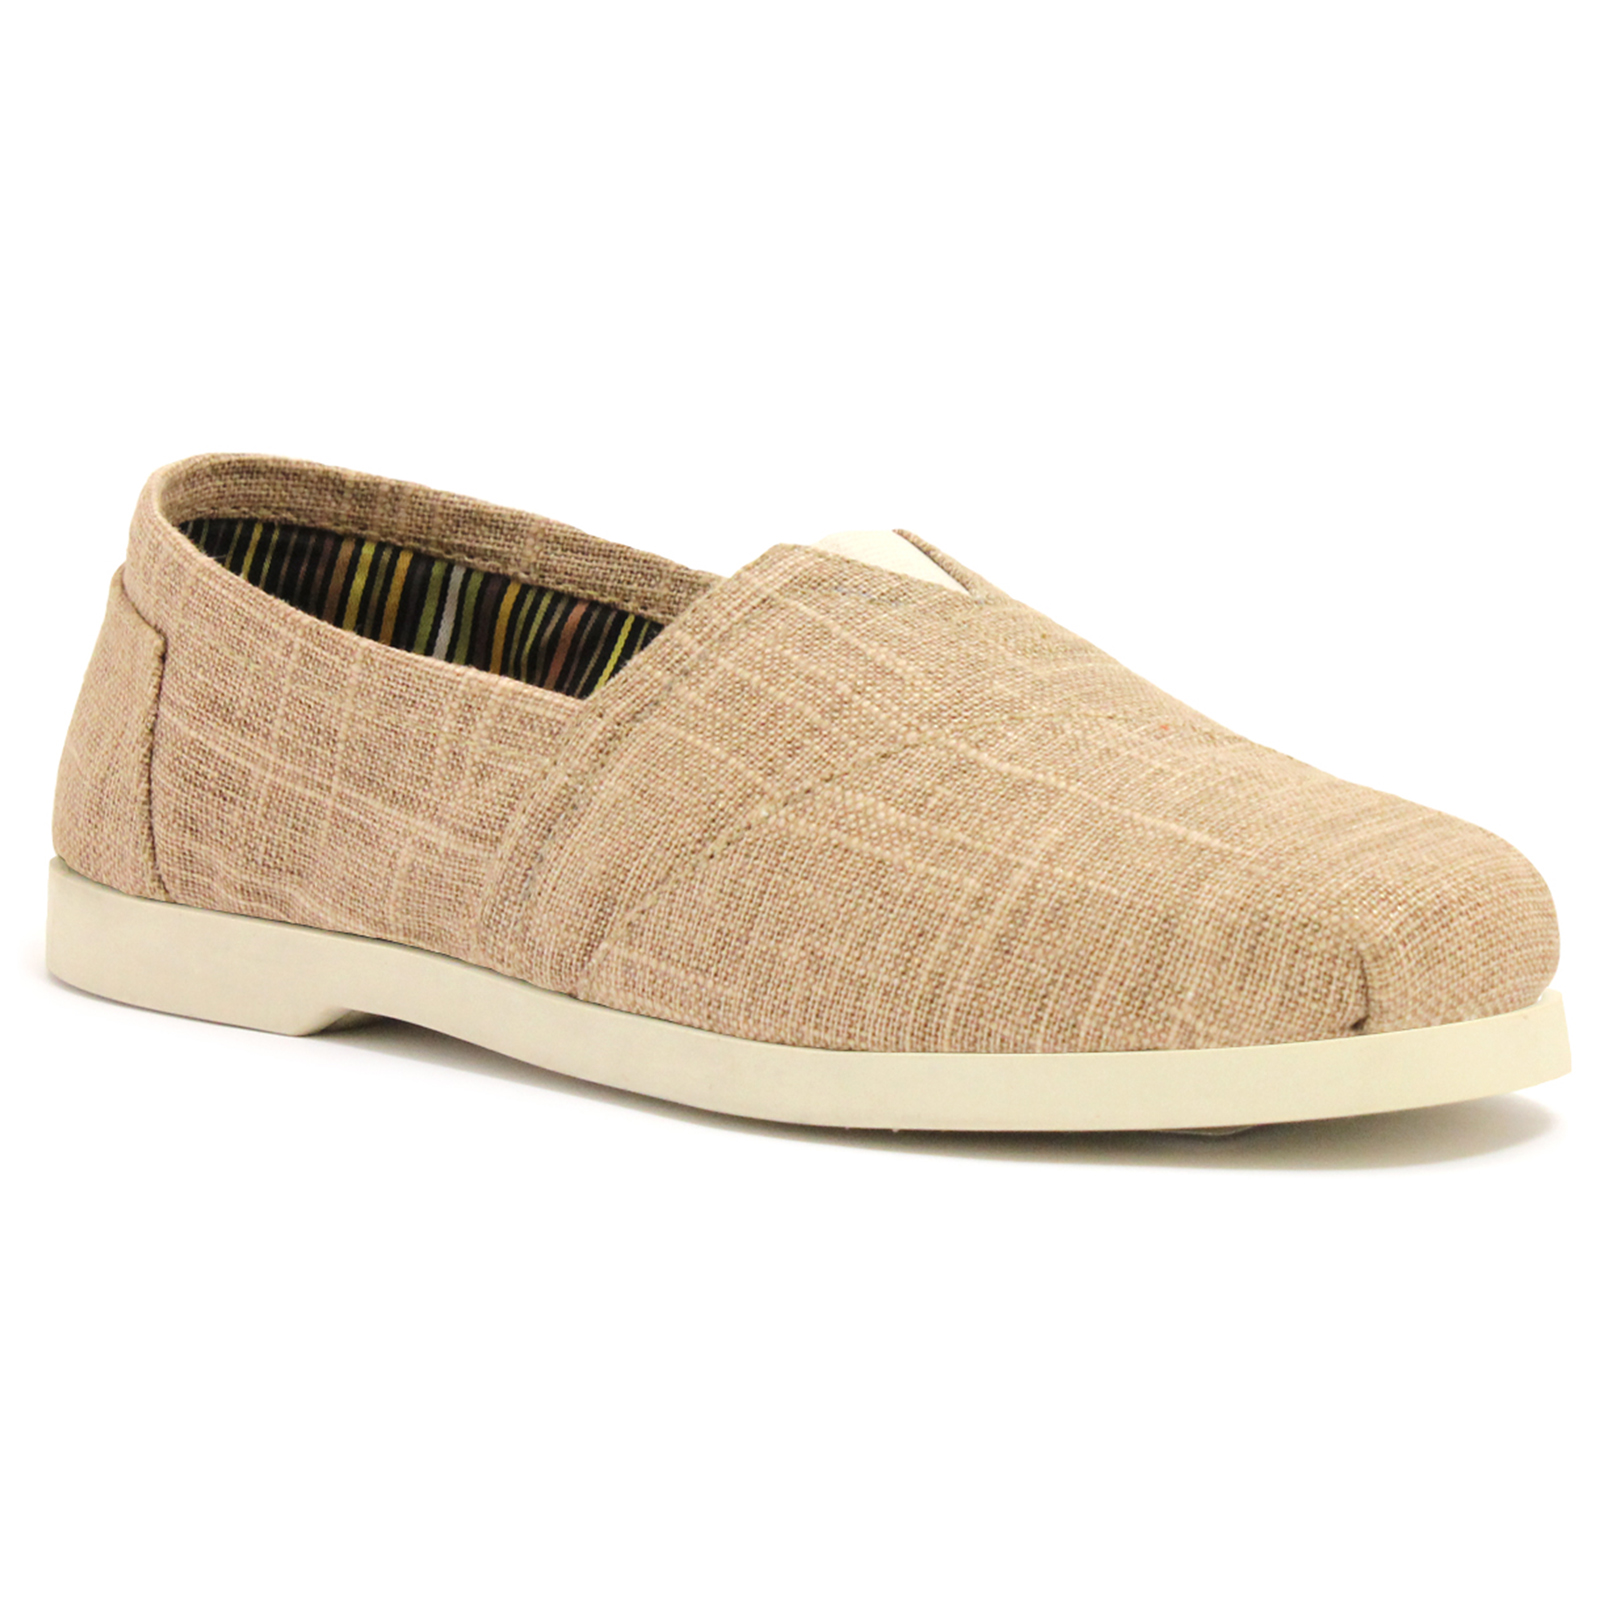 Women's 100% leather Comfort-Arch Natural shoe